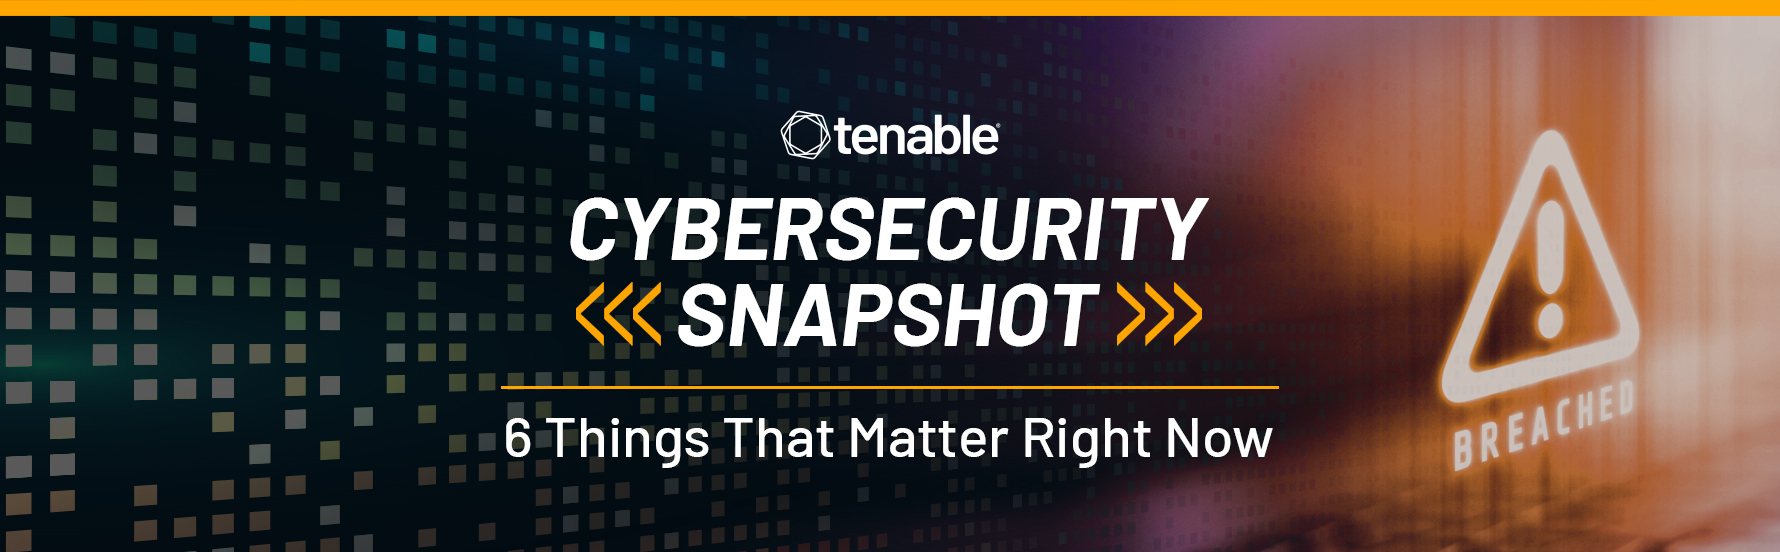 Cybersecurity Snapshot: Discover the Most Valuable Cyber Skills, Key Cloud Security Trends and Cyber’s Big Business Impact